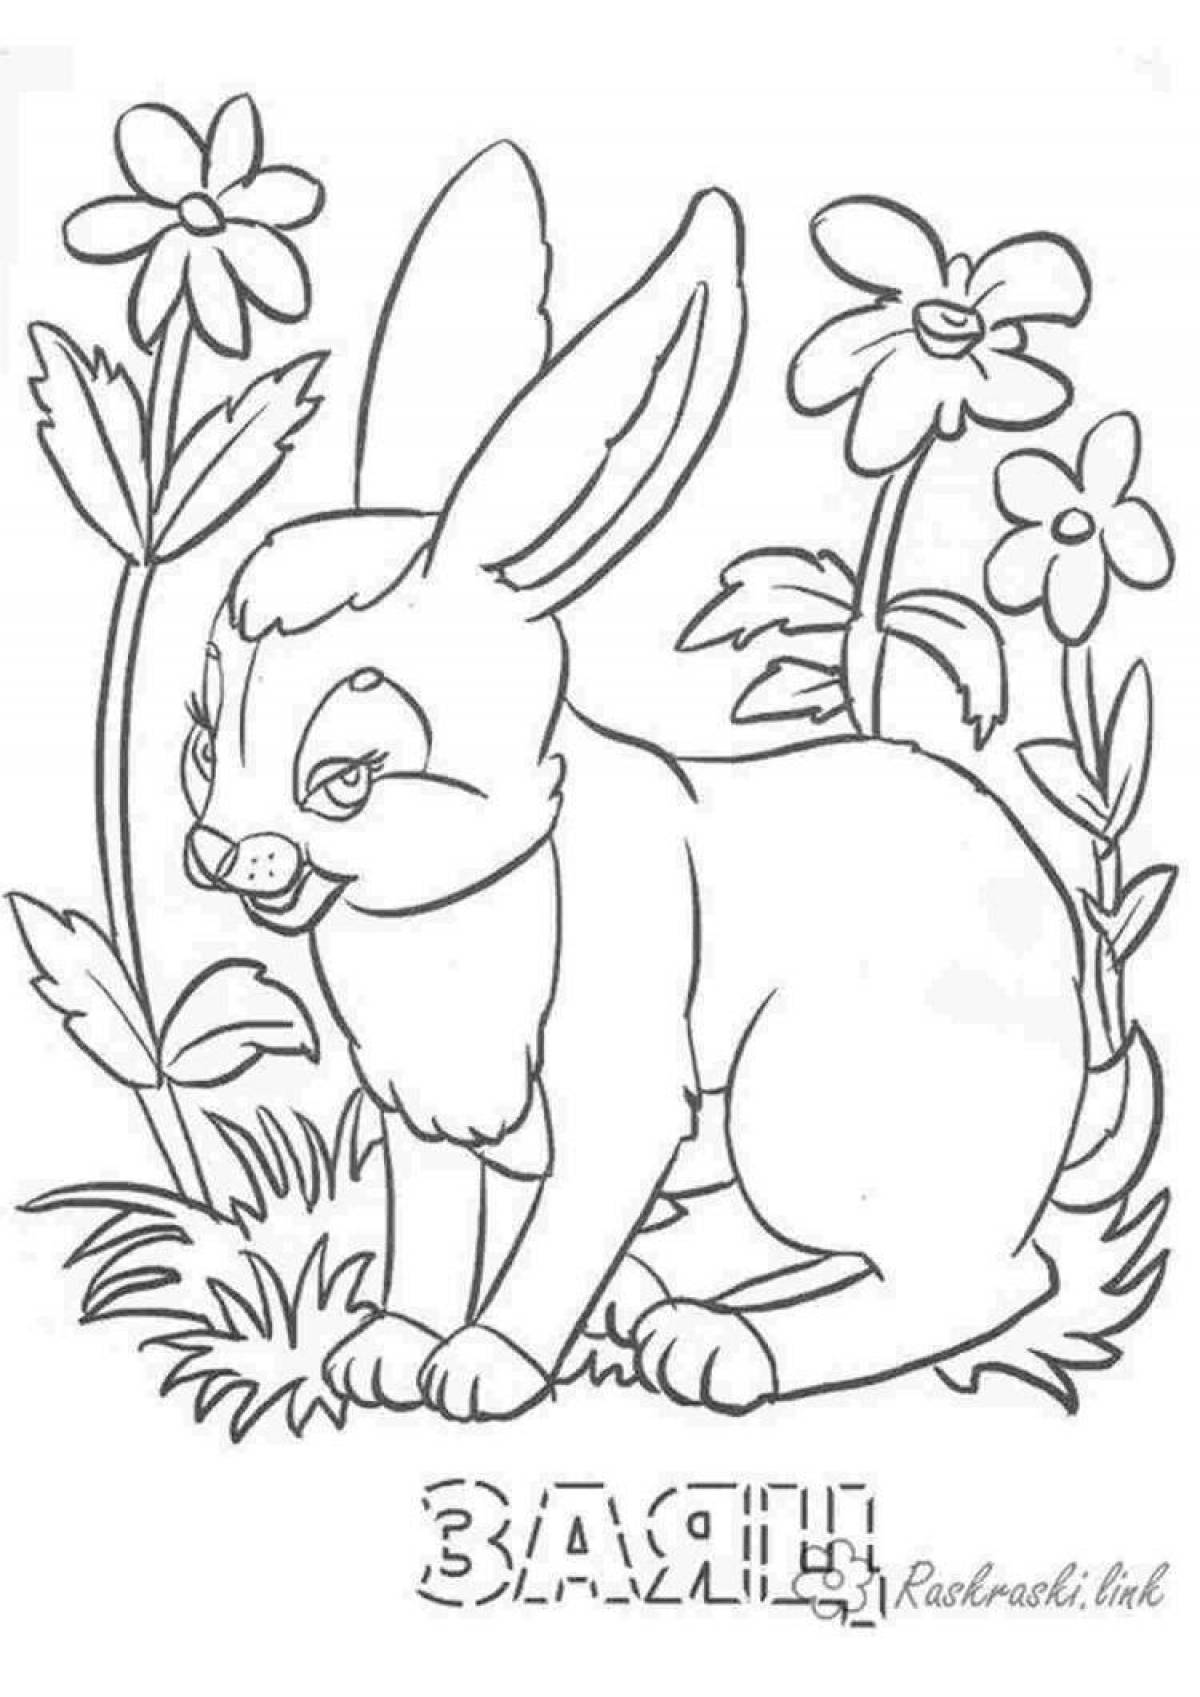 Amazing forest animals coloring page for 3-4 year olds